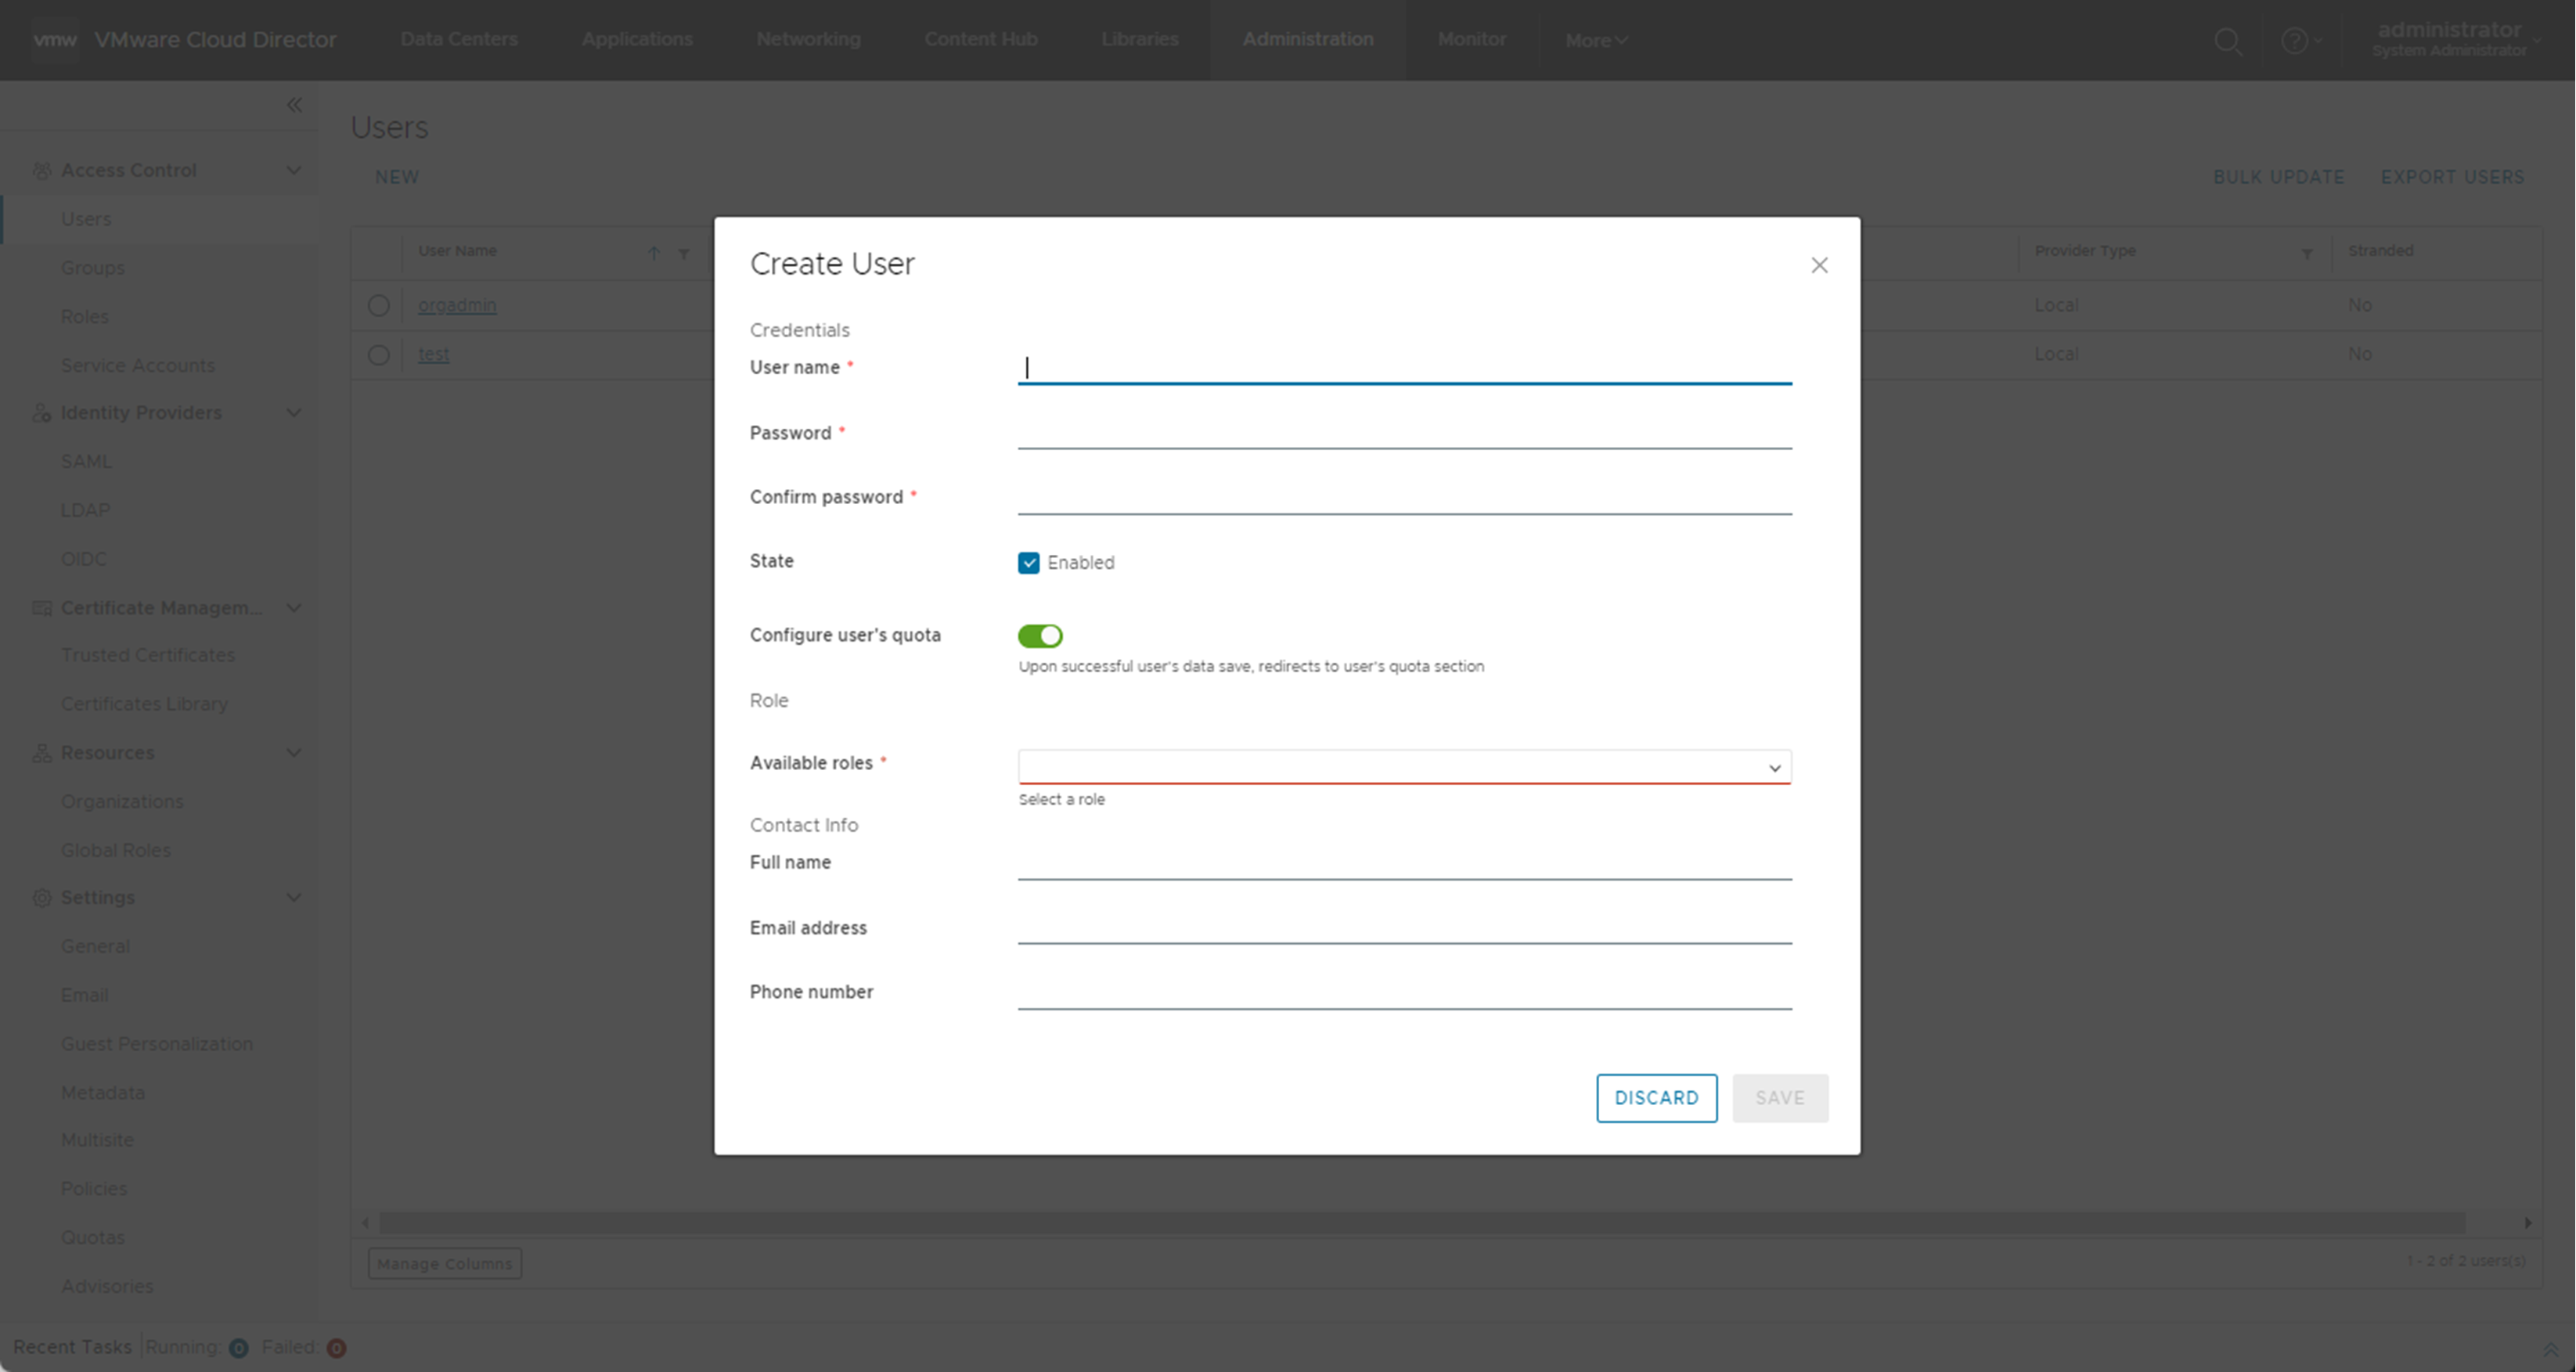 You can create a VMware Cloud Director user by selecting a user name, password, and role.